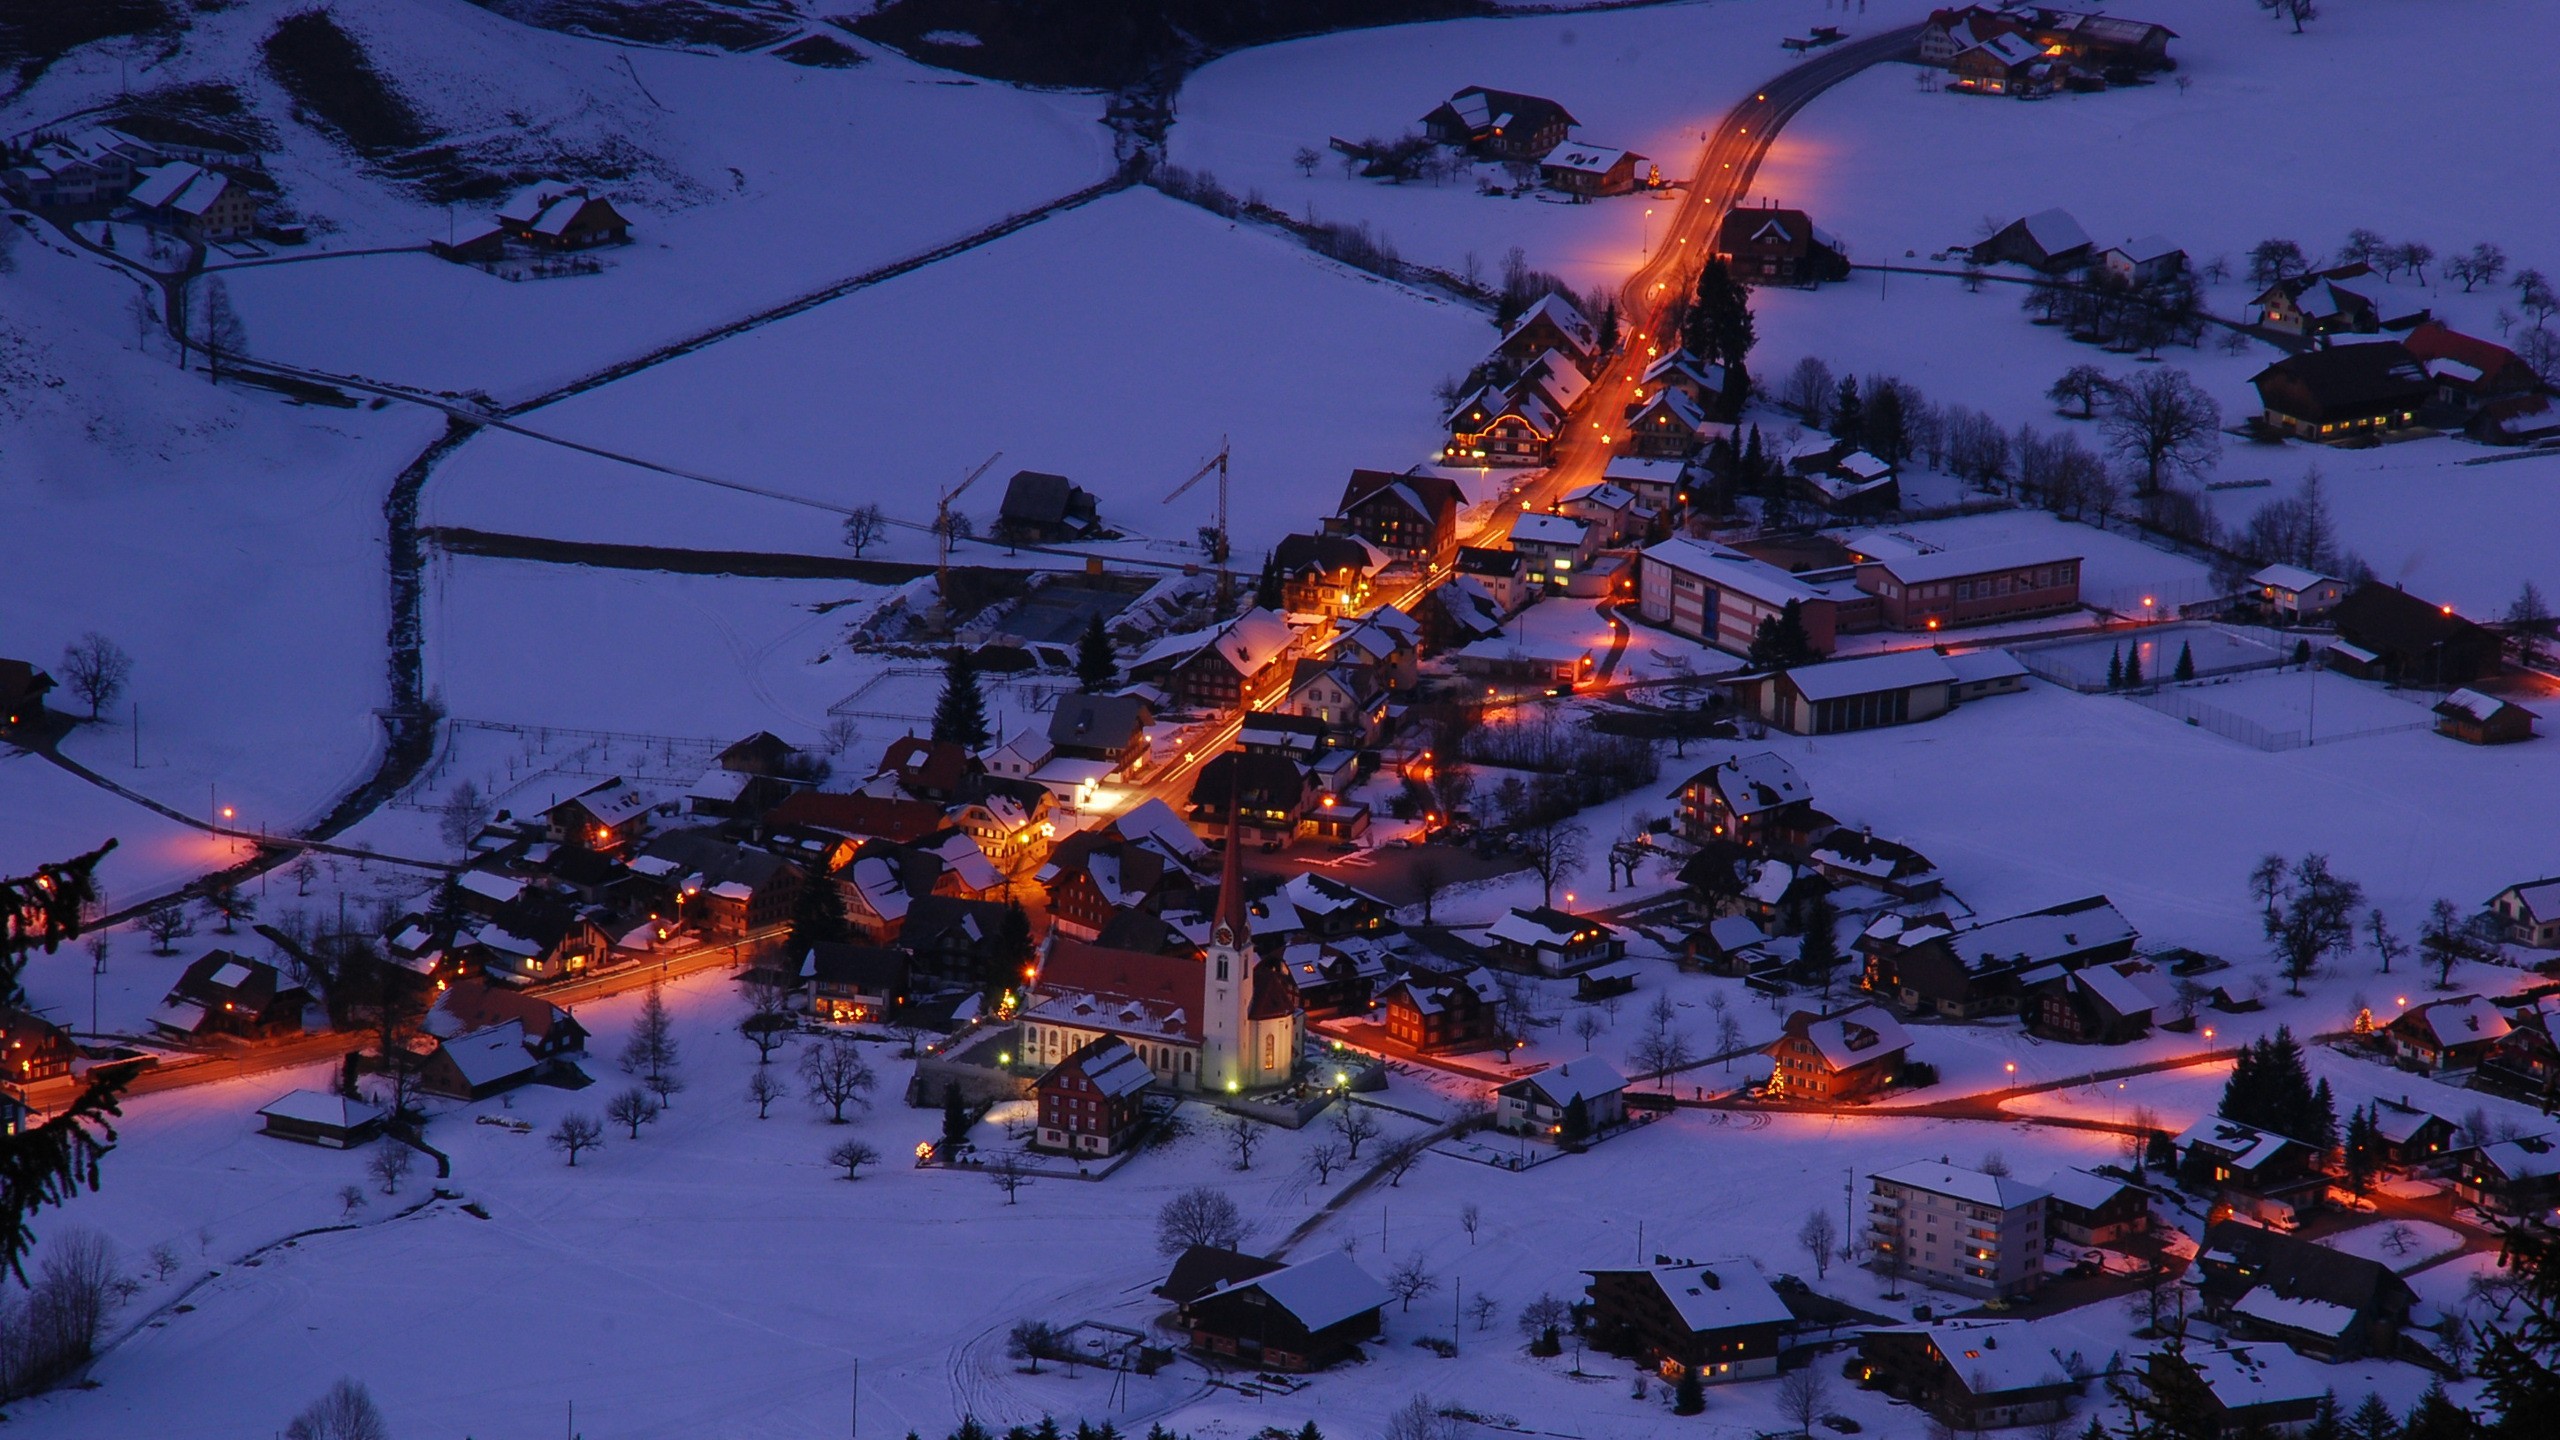 General 2560x1440 snow Germany winter village lights cold ice aerial view